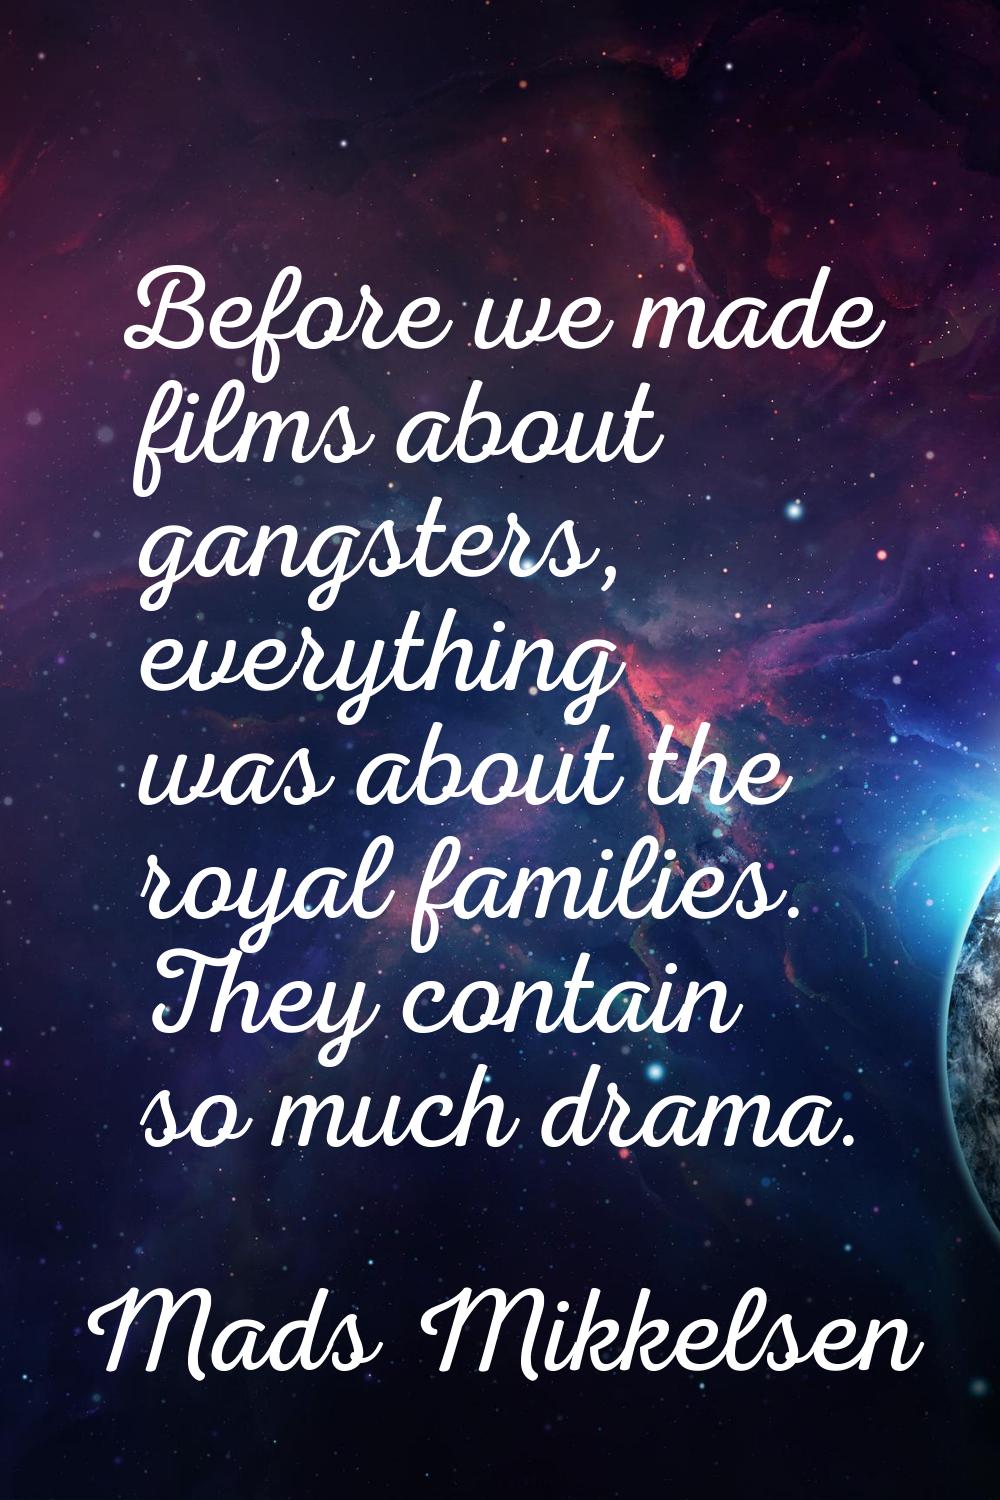 Before we made films about gangsters, everything was about the royal families. They contain so much